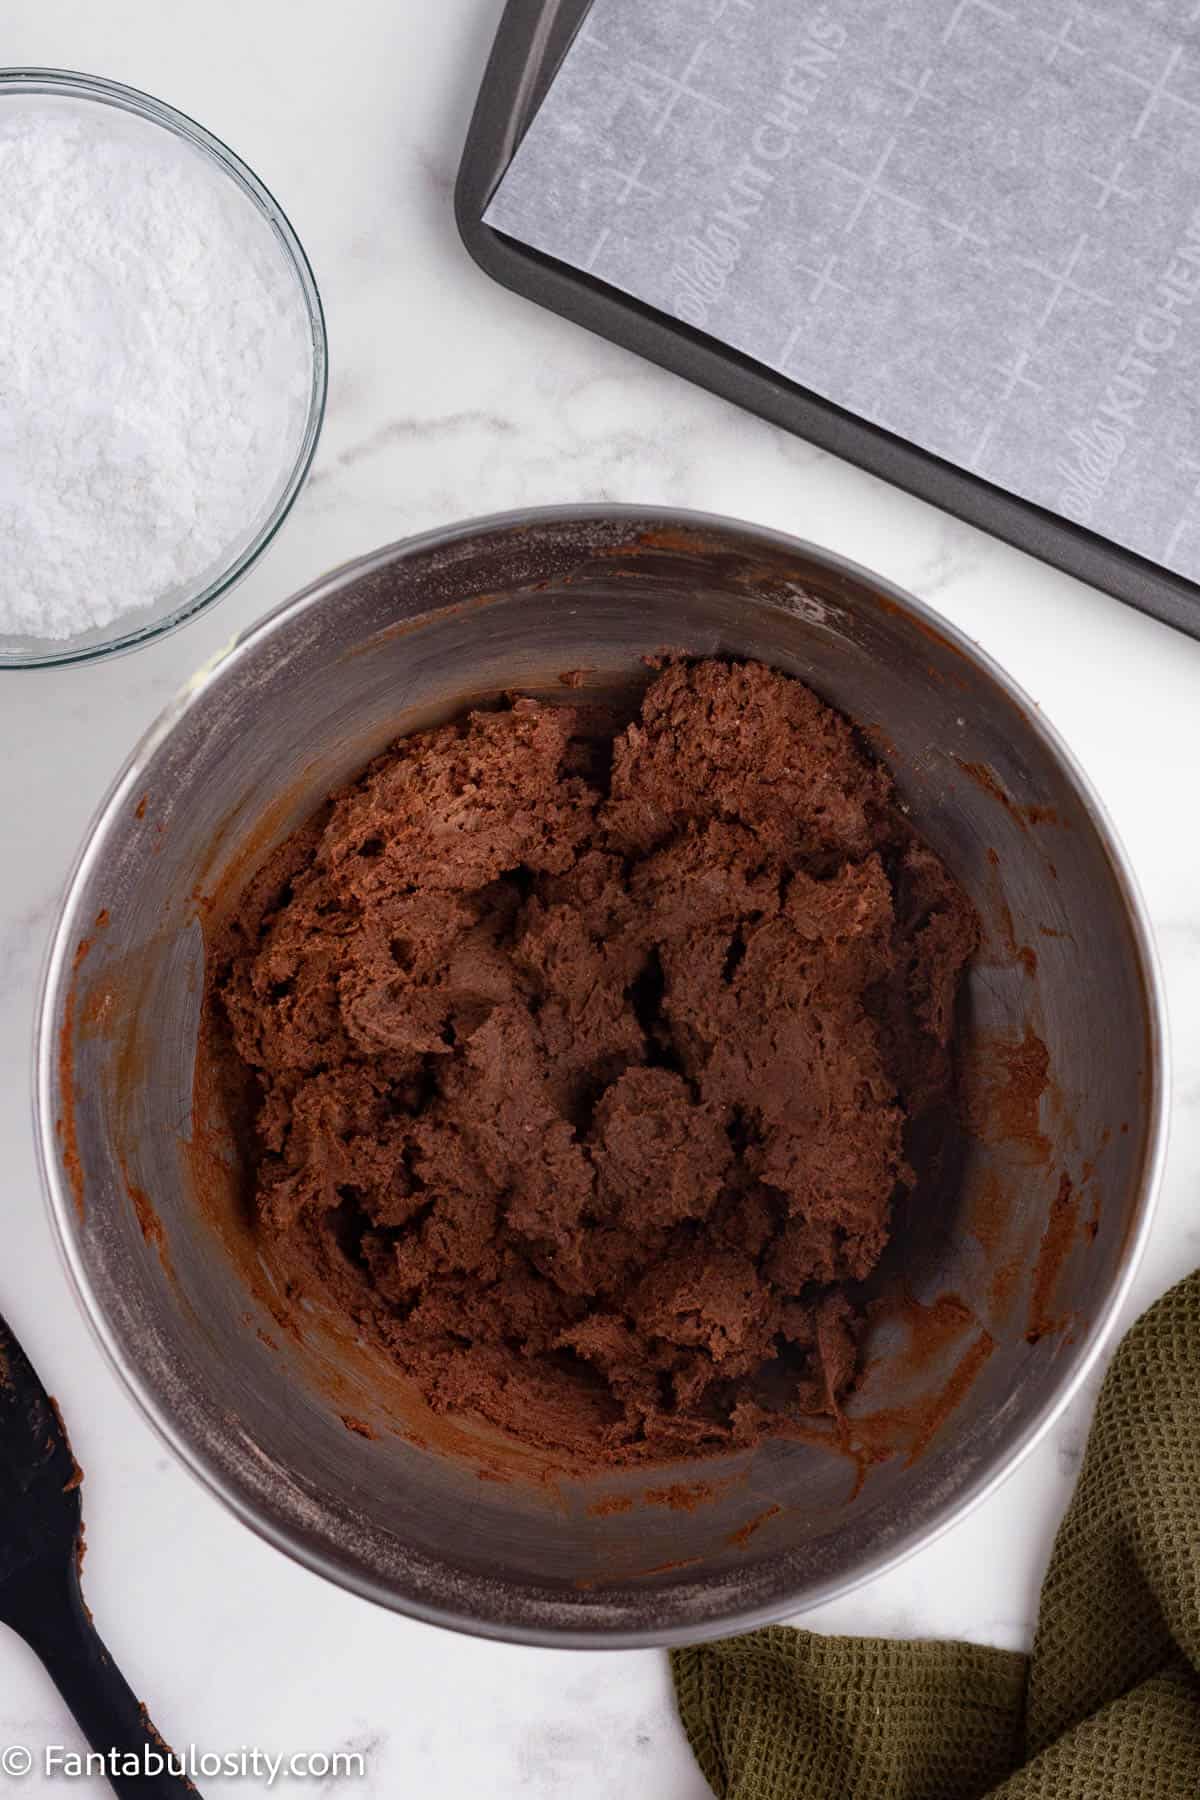 Deep brown chocolate cookie dough is shown in a large metal mixing bowl